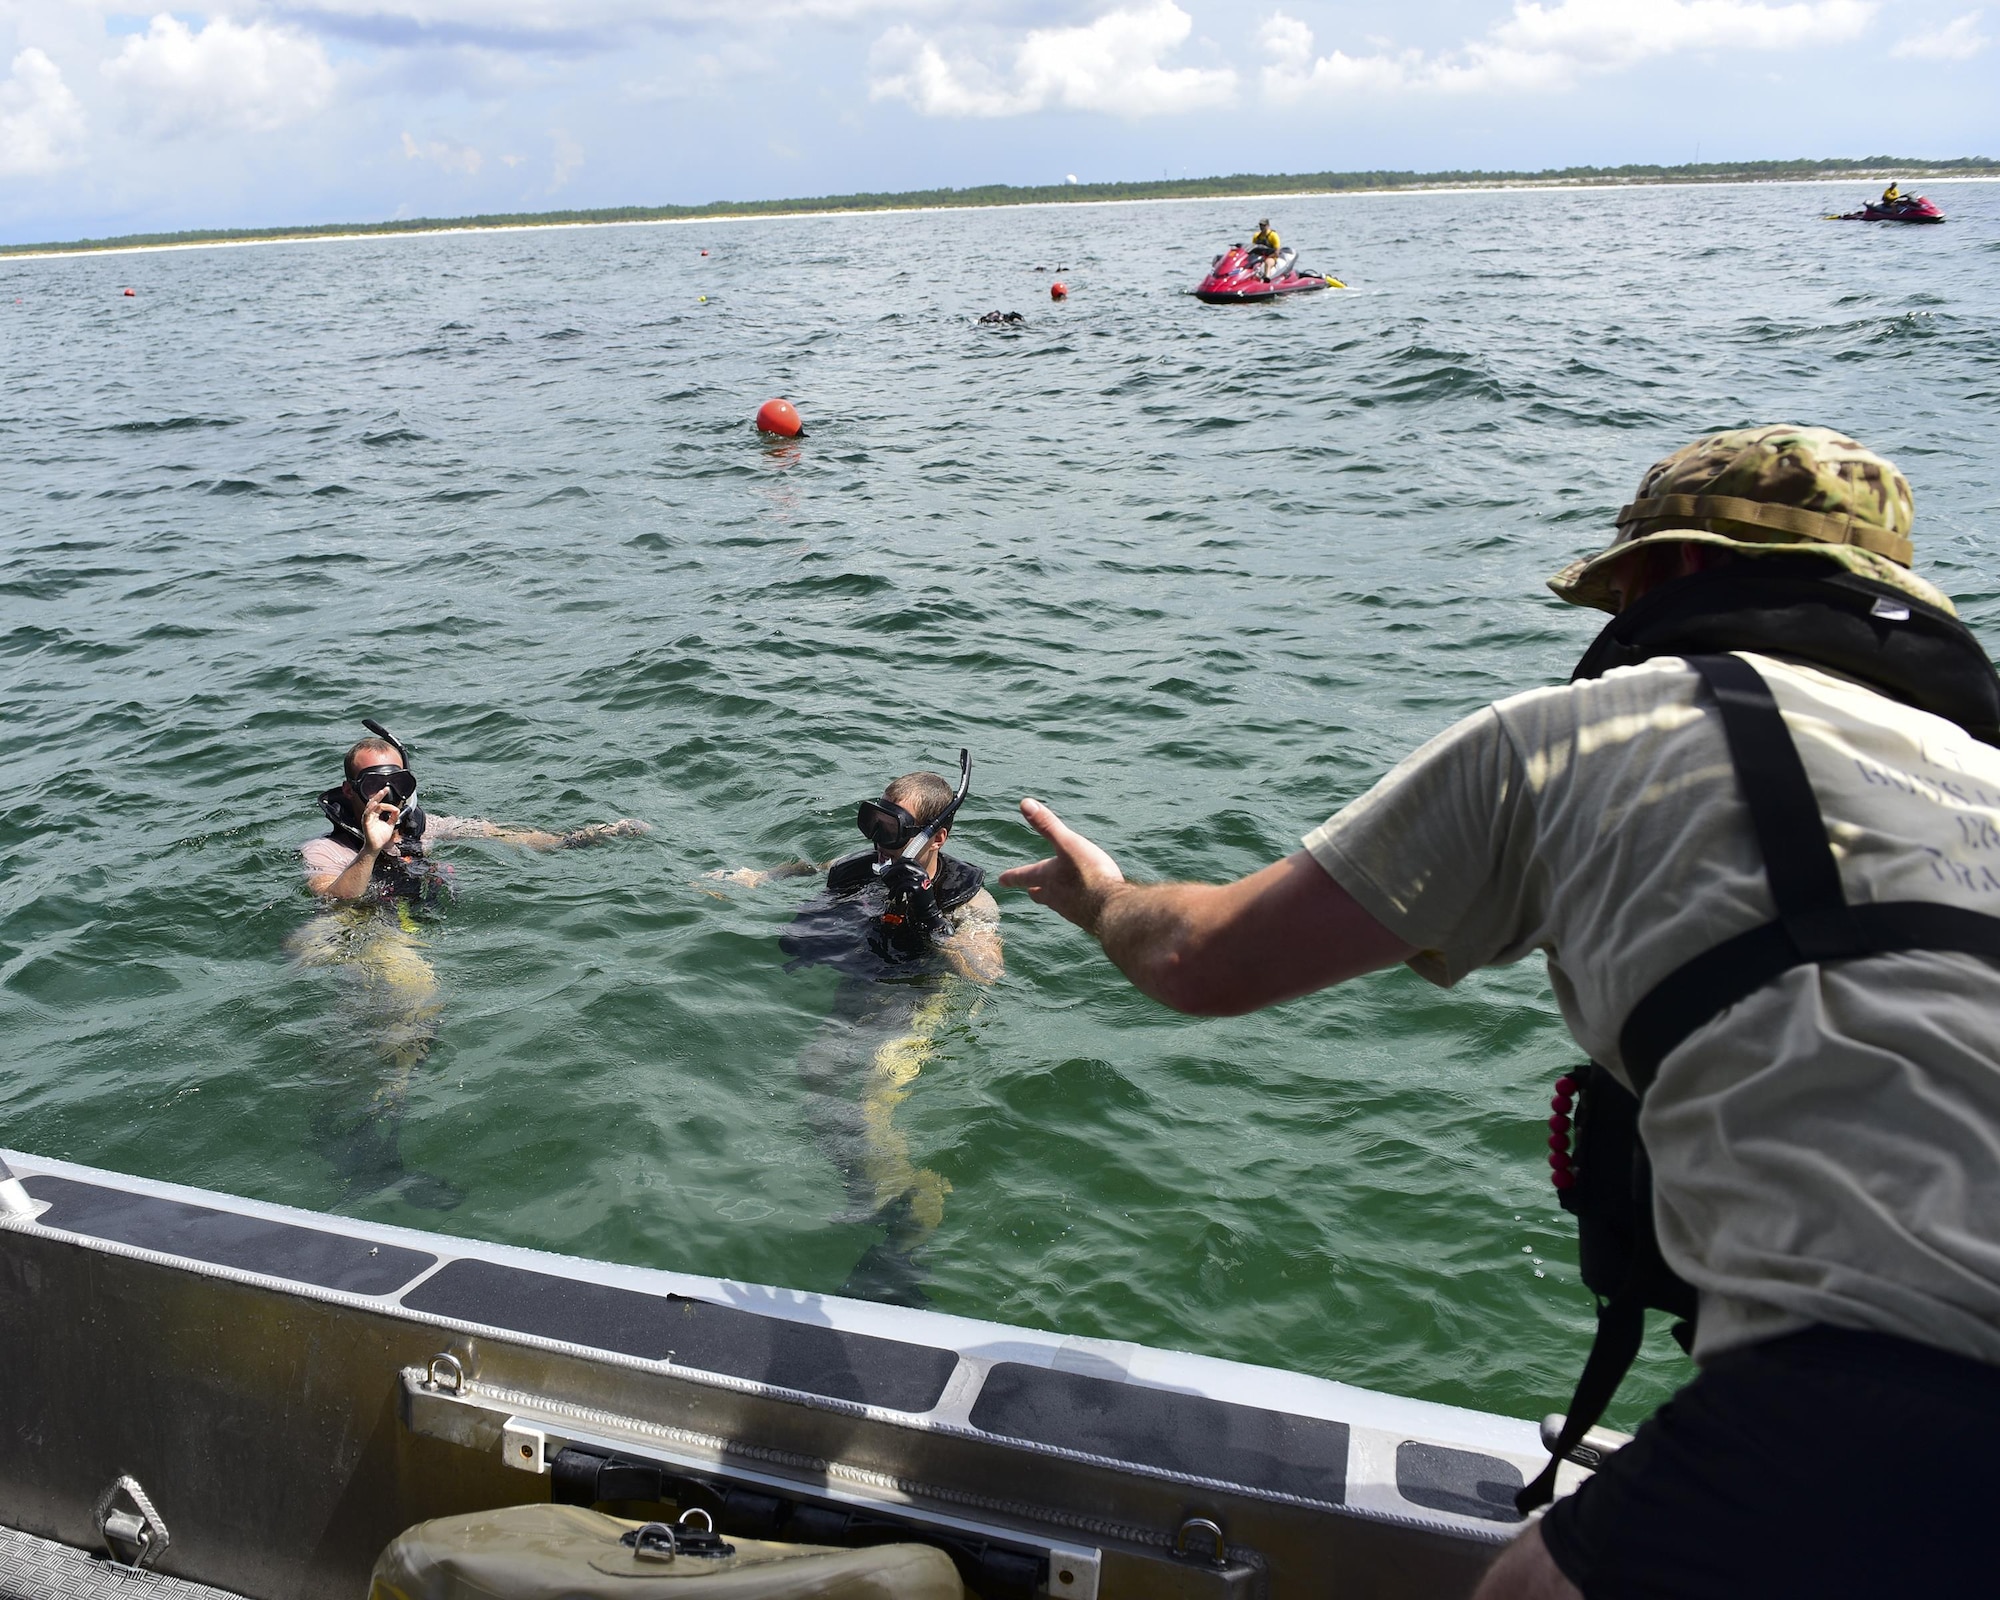 Naval Diving and Salvage Training Center students consult with one another during a training exercise in the Gulf of Mexico, Aug. 15, 2017. Air Force combat rescue officers also go through the same training alongside their enlisted counterparts during this course.